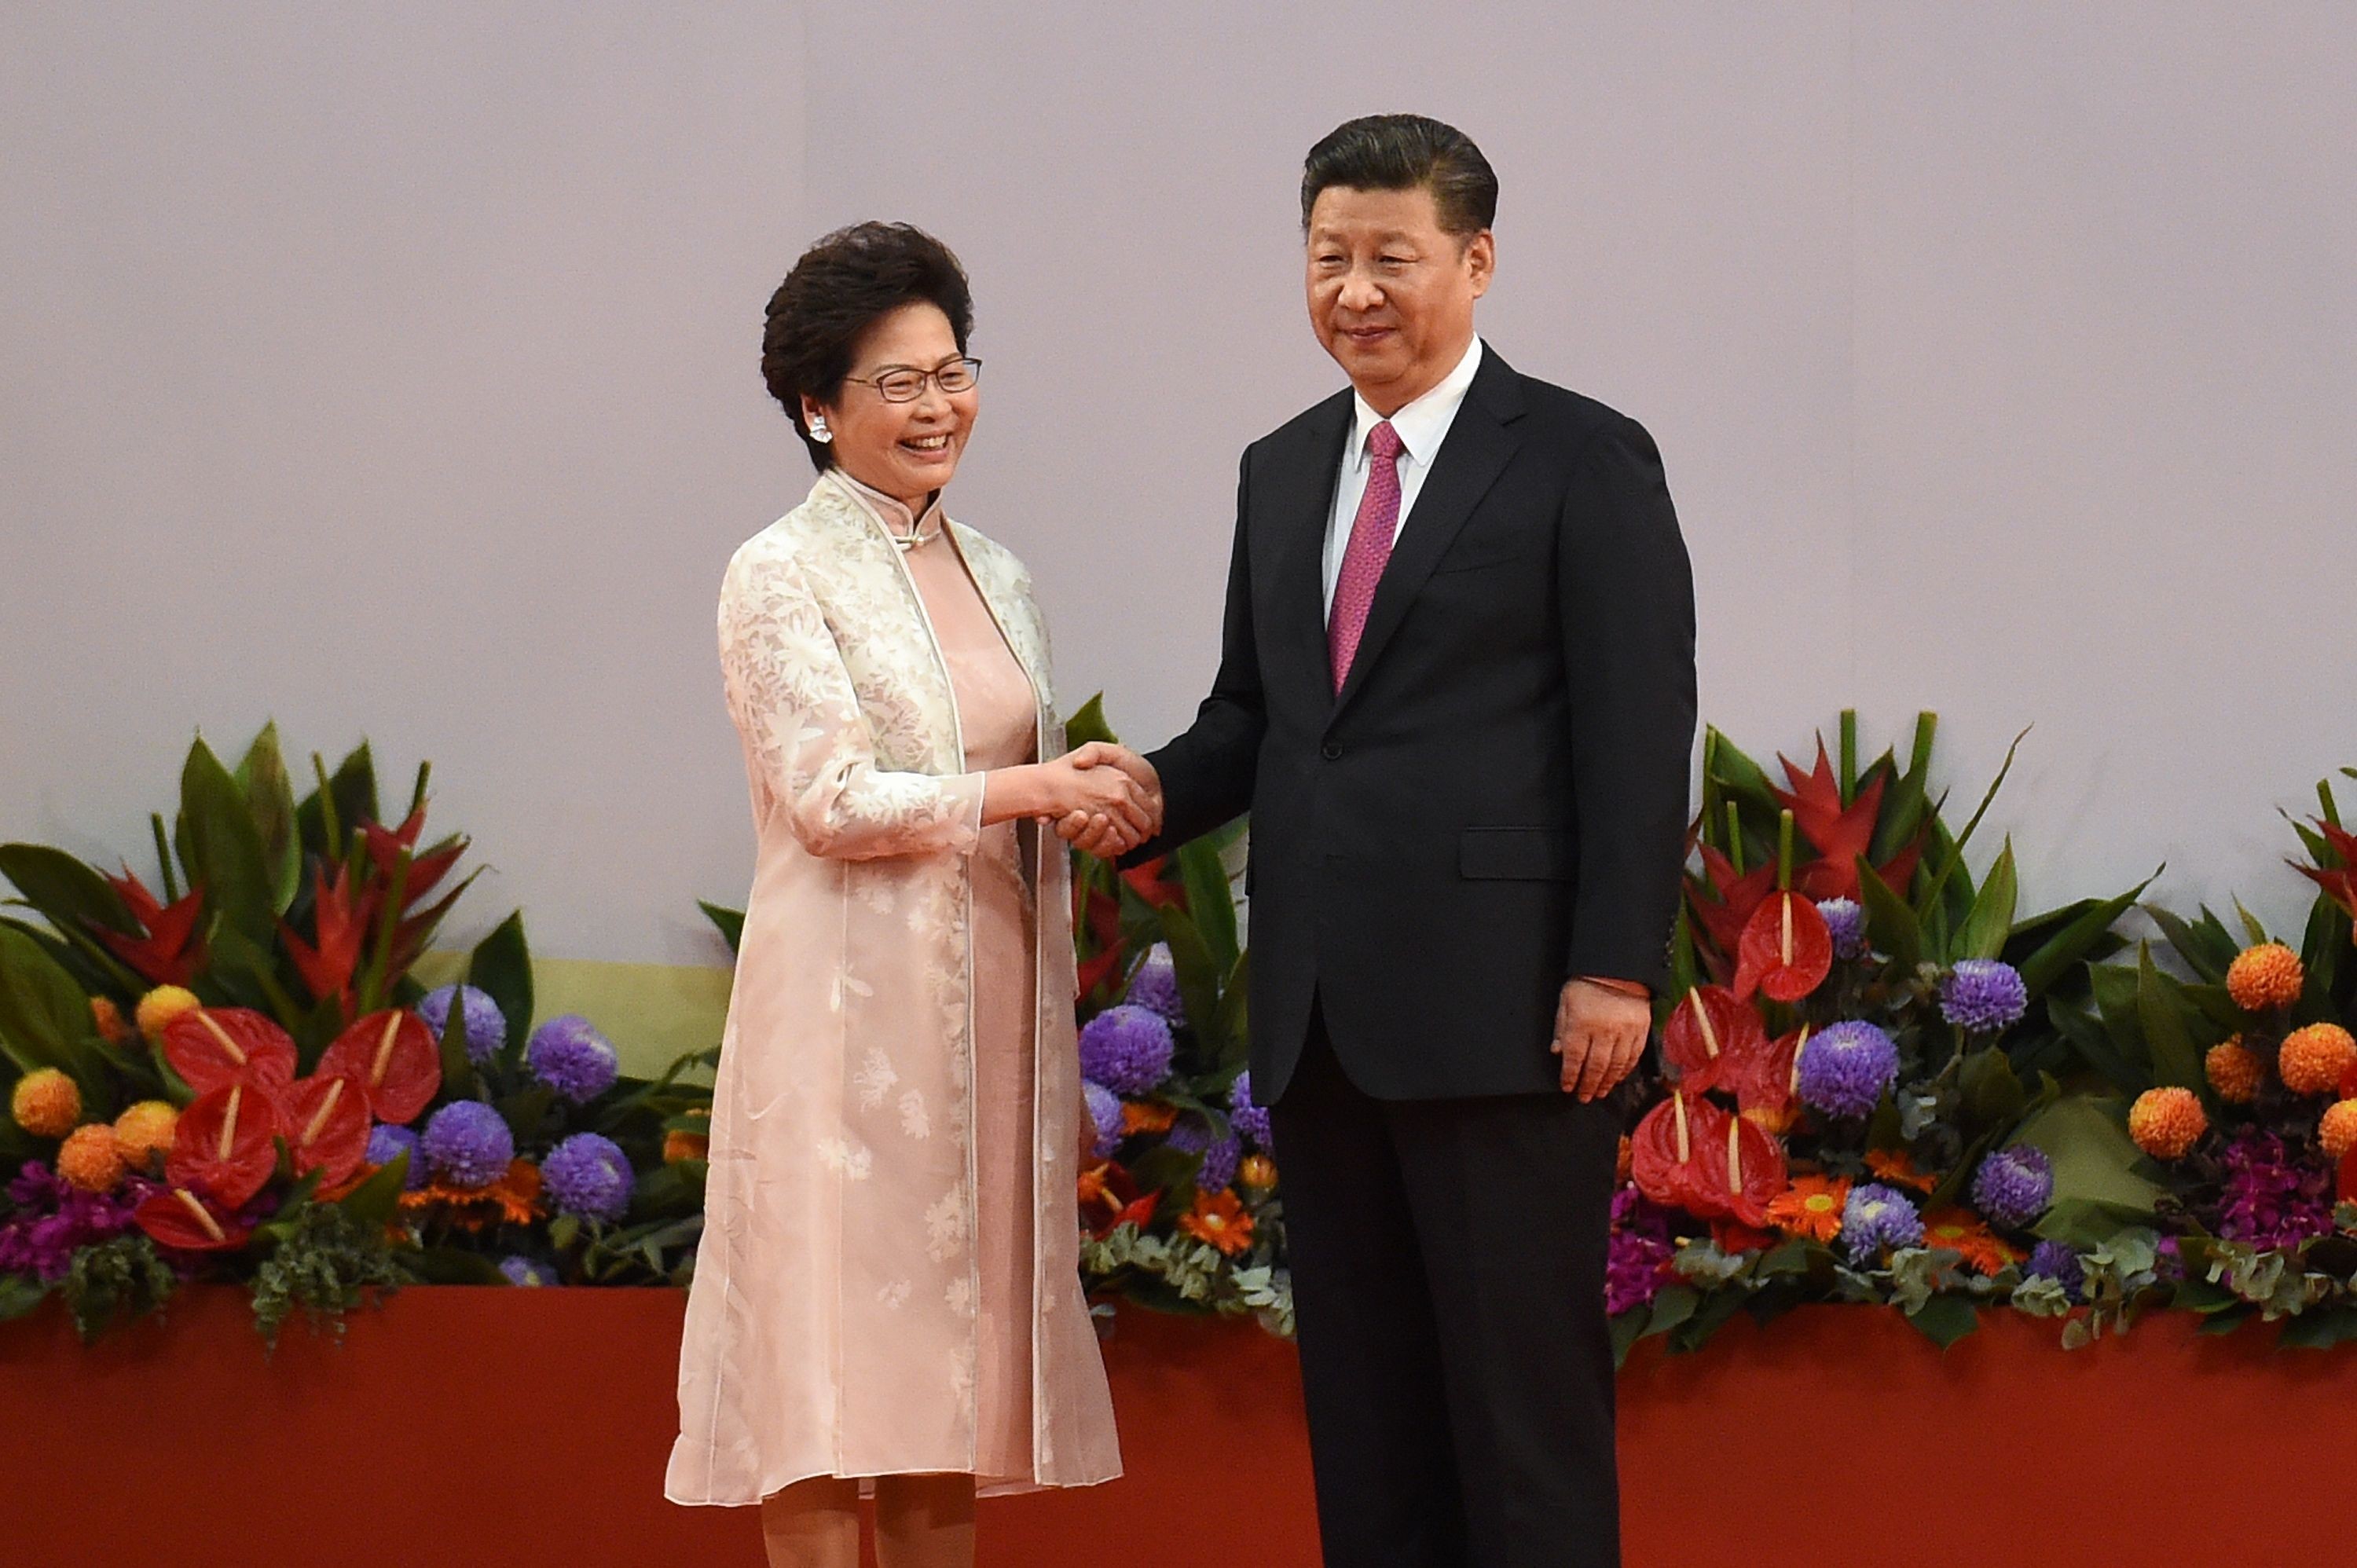 President Xi Jinping shakes hands with Carrie Lam, Hong Kong’s new chief executive. Photo: AFP